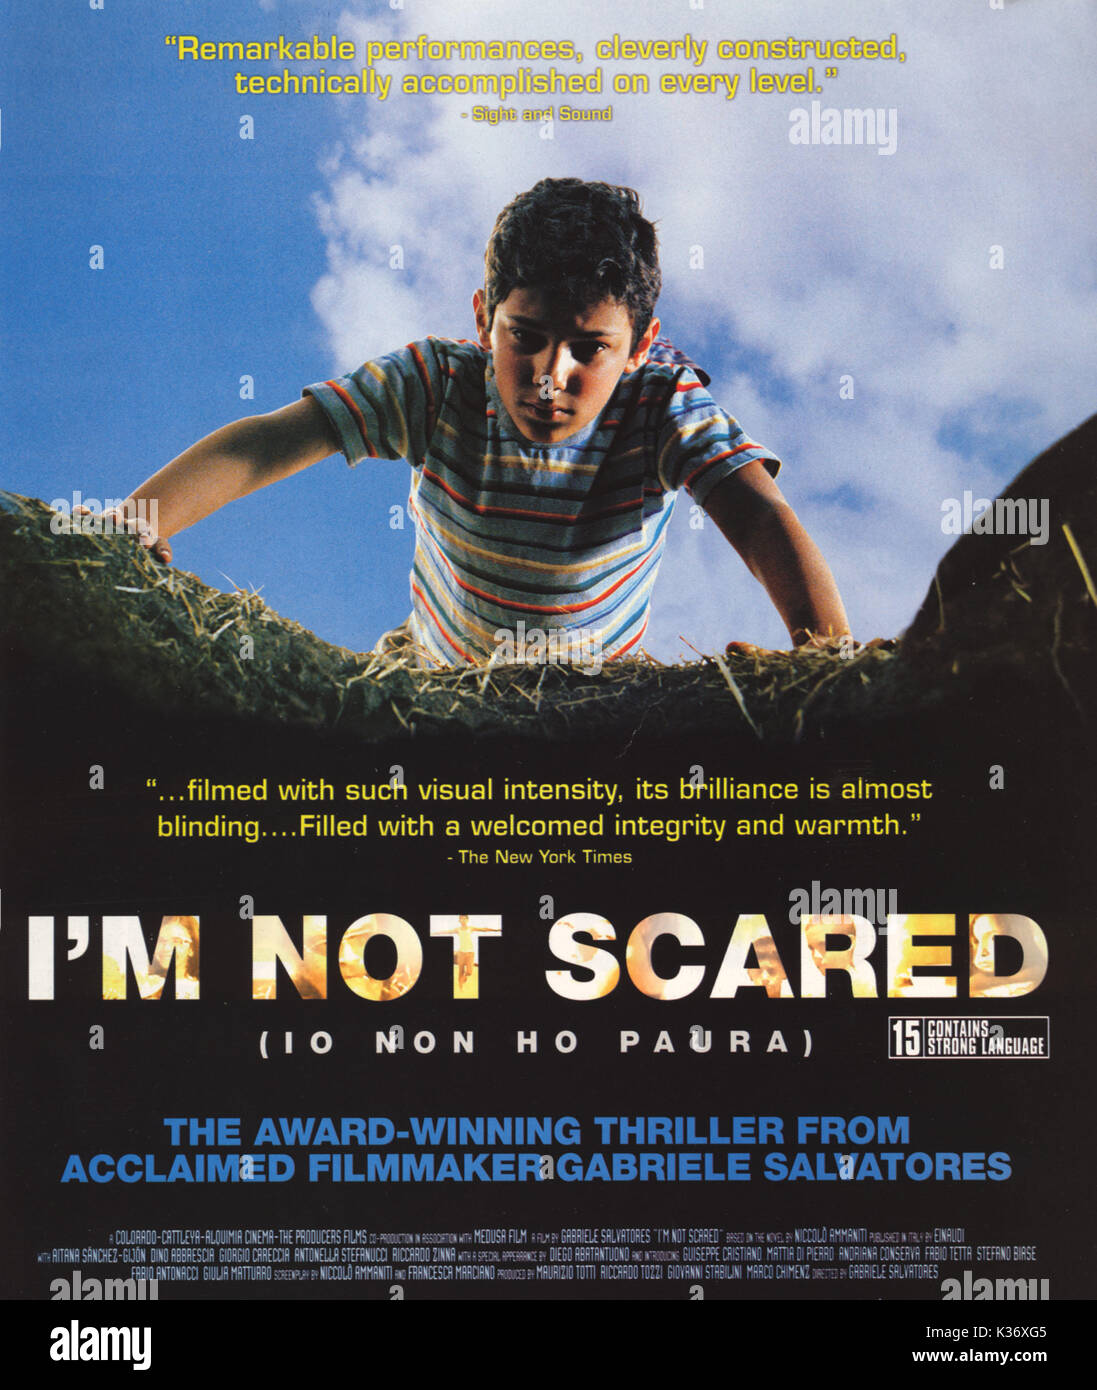 IO NON HO PAURA (IT/SP/UK 2003) aka I'M NOT SCARED POSTER FROM THE RONALD GRANT ARCHIVE IO NON HO PAURA (IT/SP/UK 2003) aka I'M NOT SCARED     Date: 2003 Stock Photo